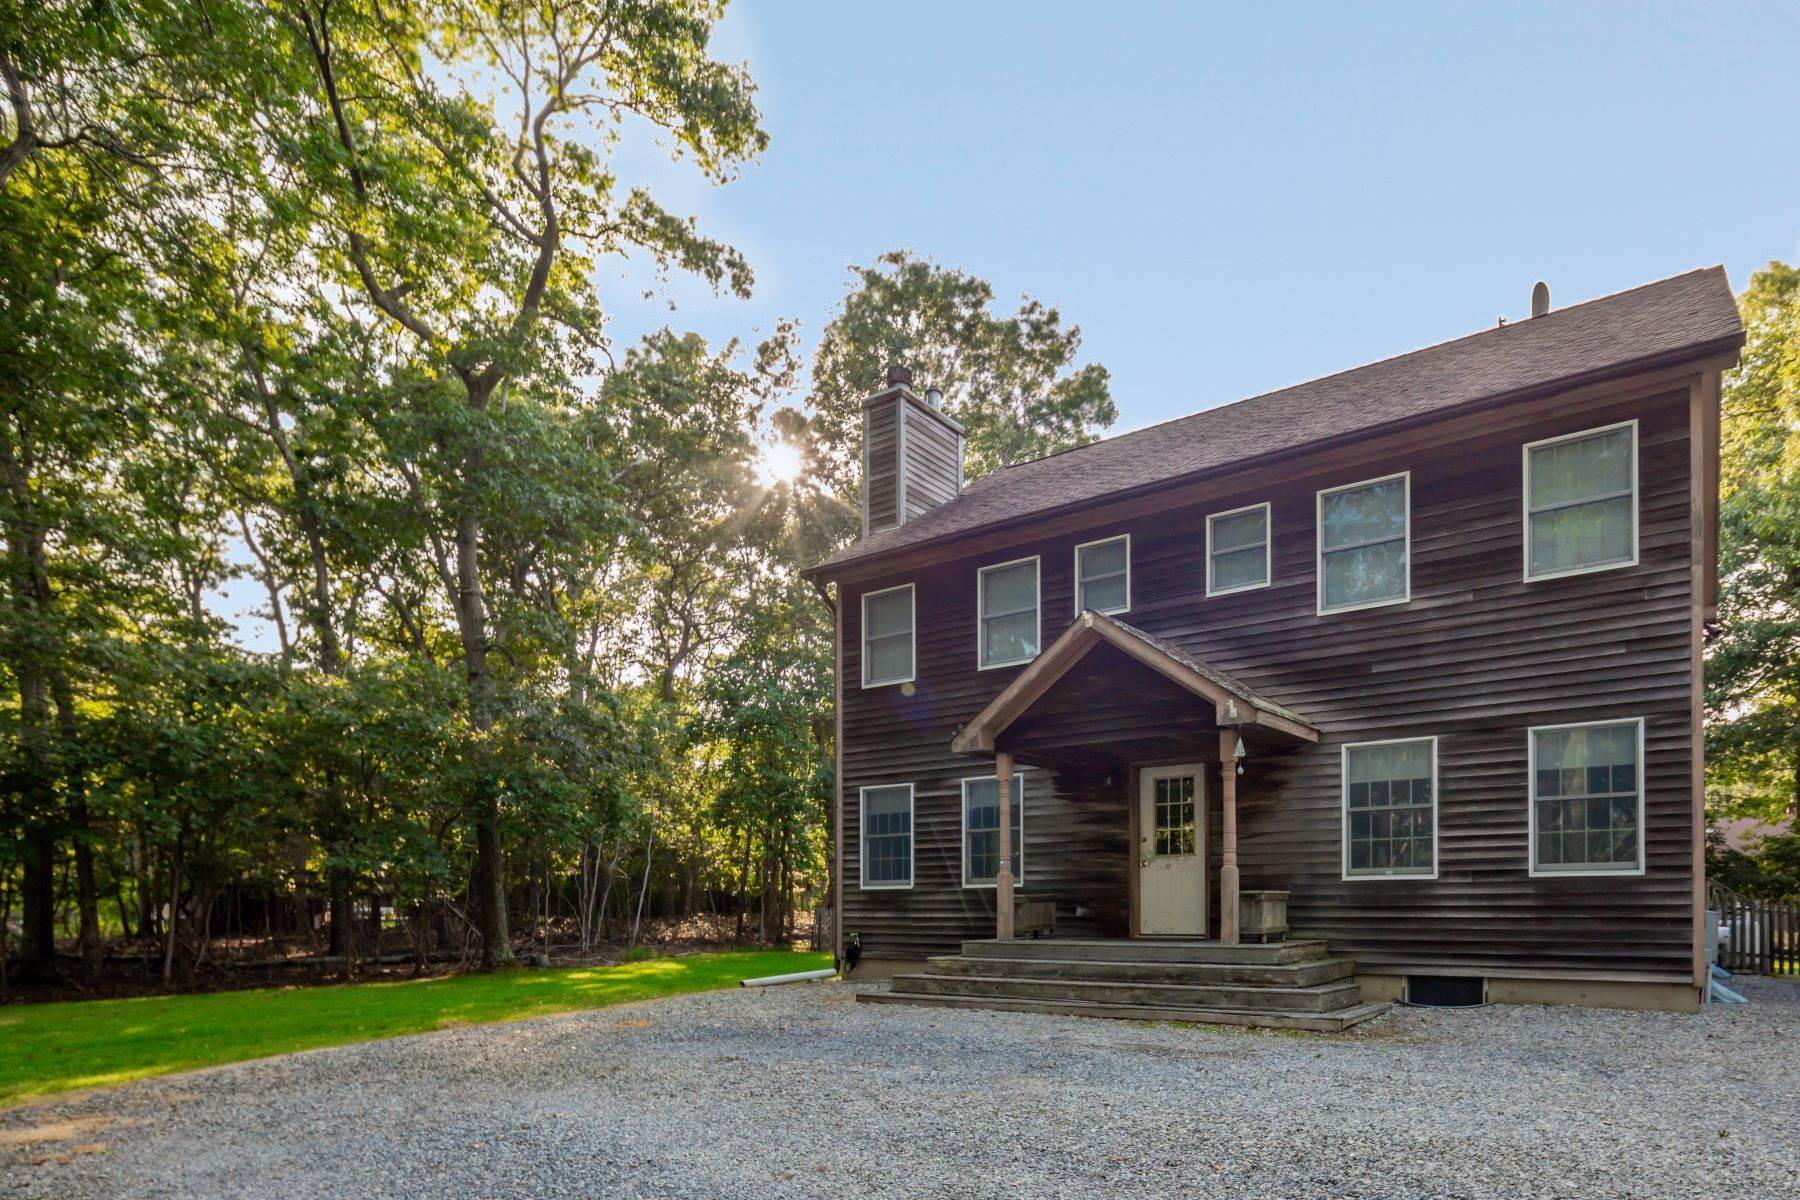 Single Family Homes for Sale at Clearwater Getaway 18 Rutland Road East Hampton, New York 11937 United States